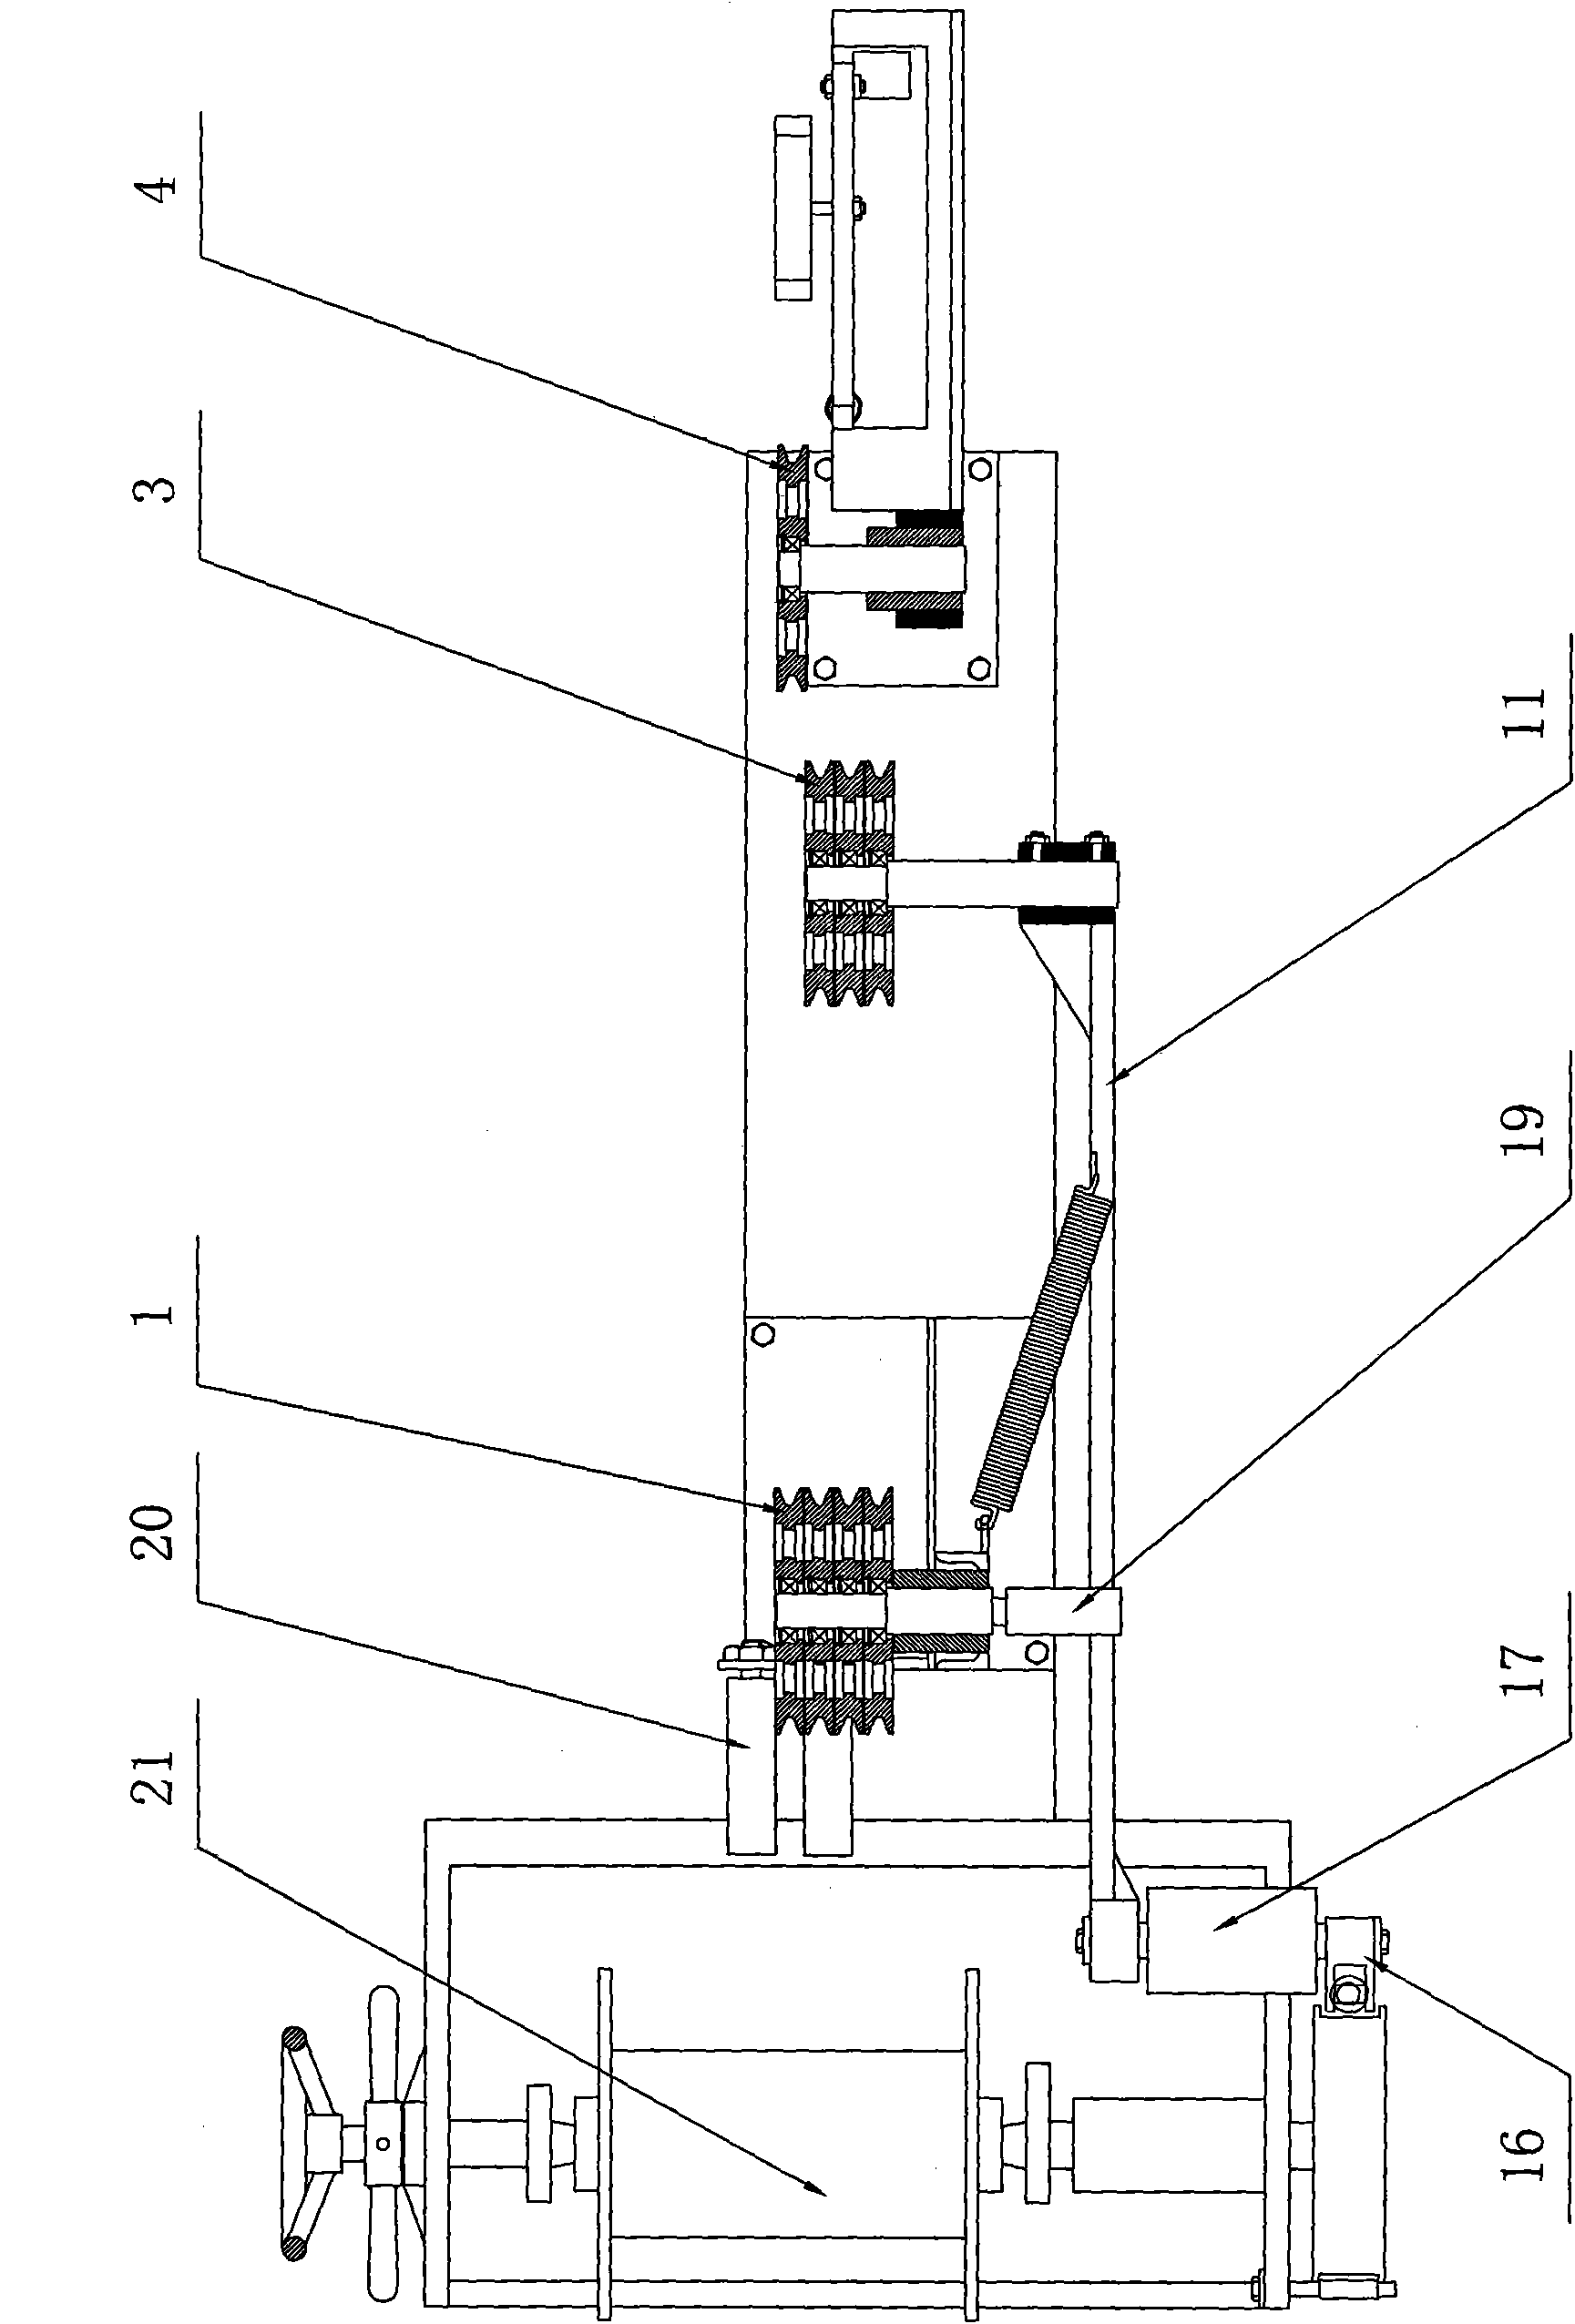 Tension-driving automatic wire-arranging mechanism